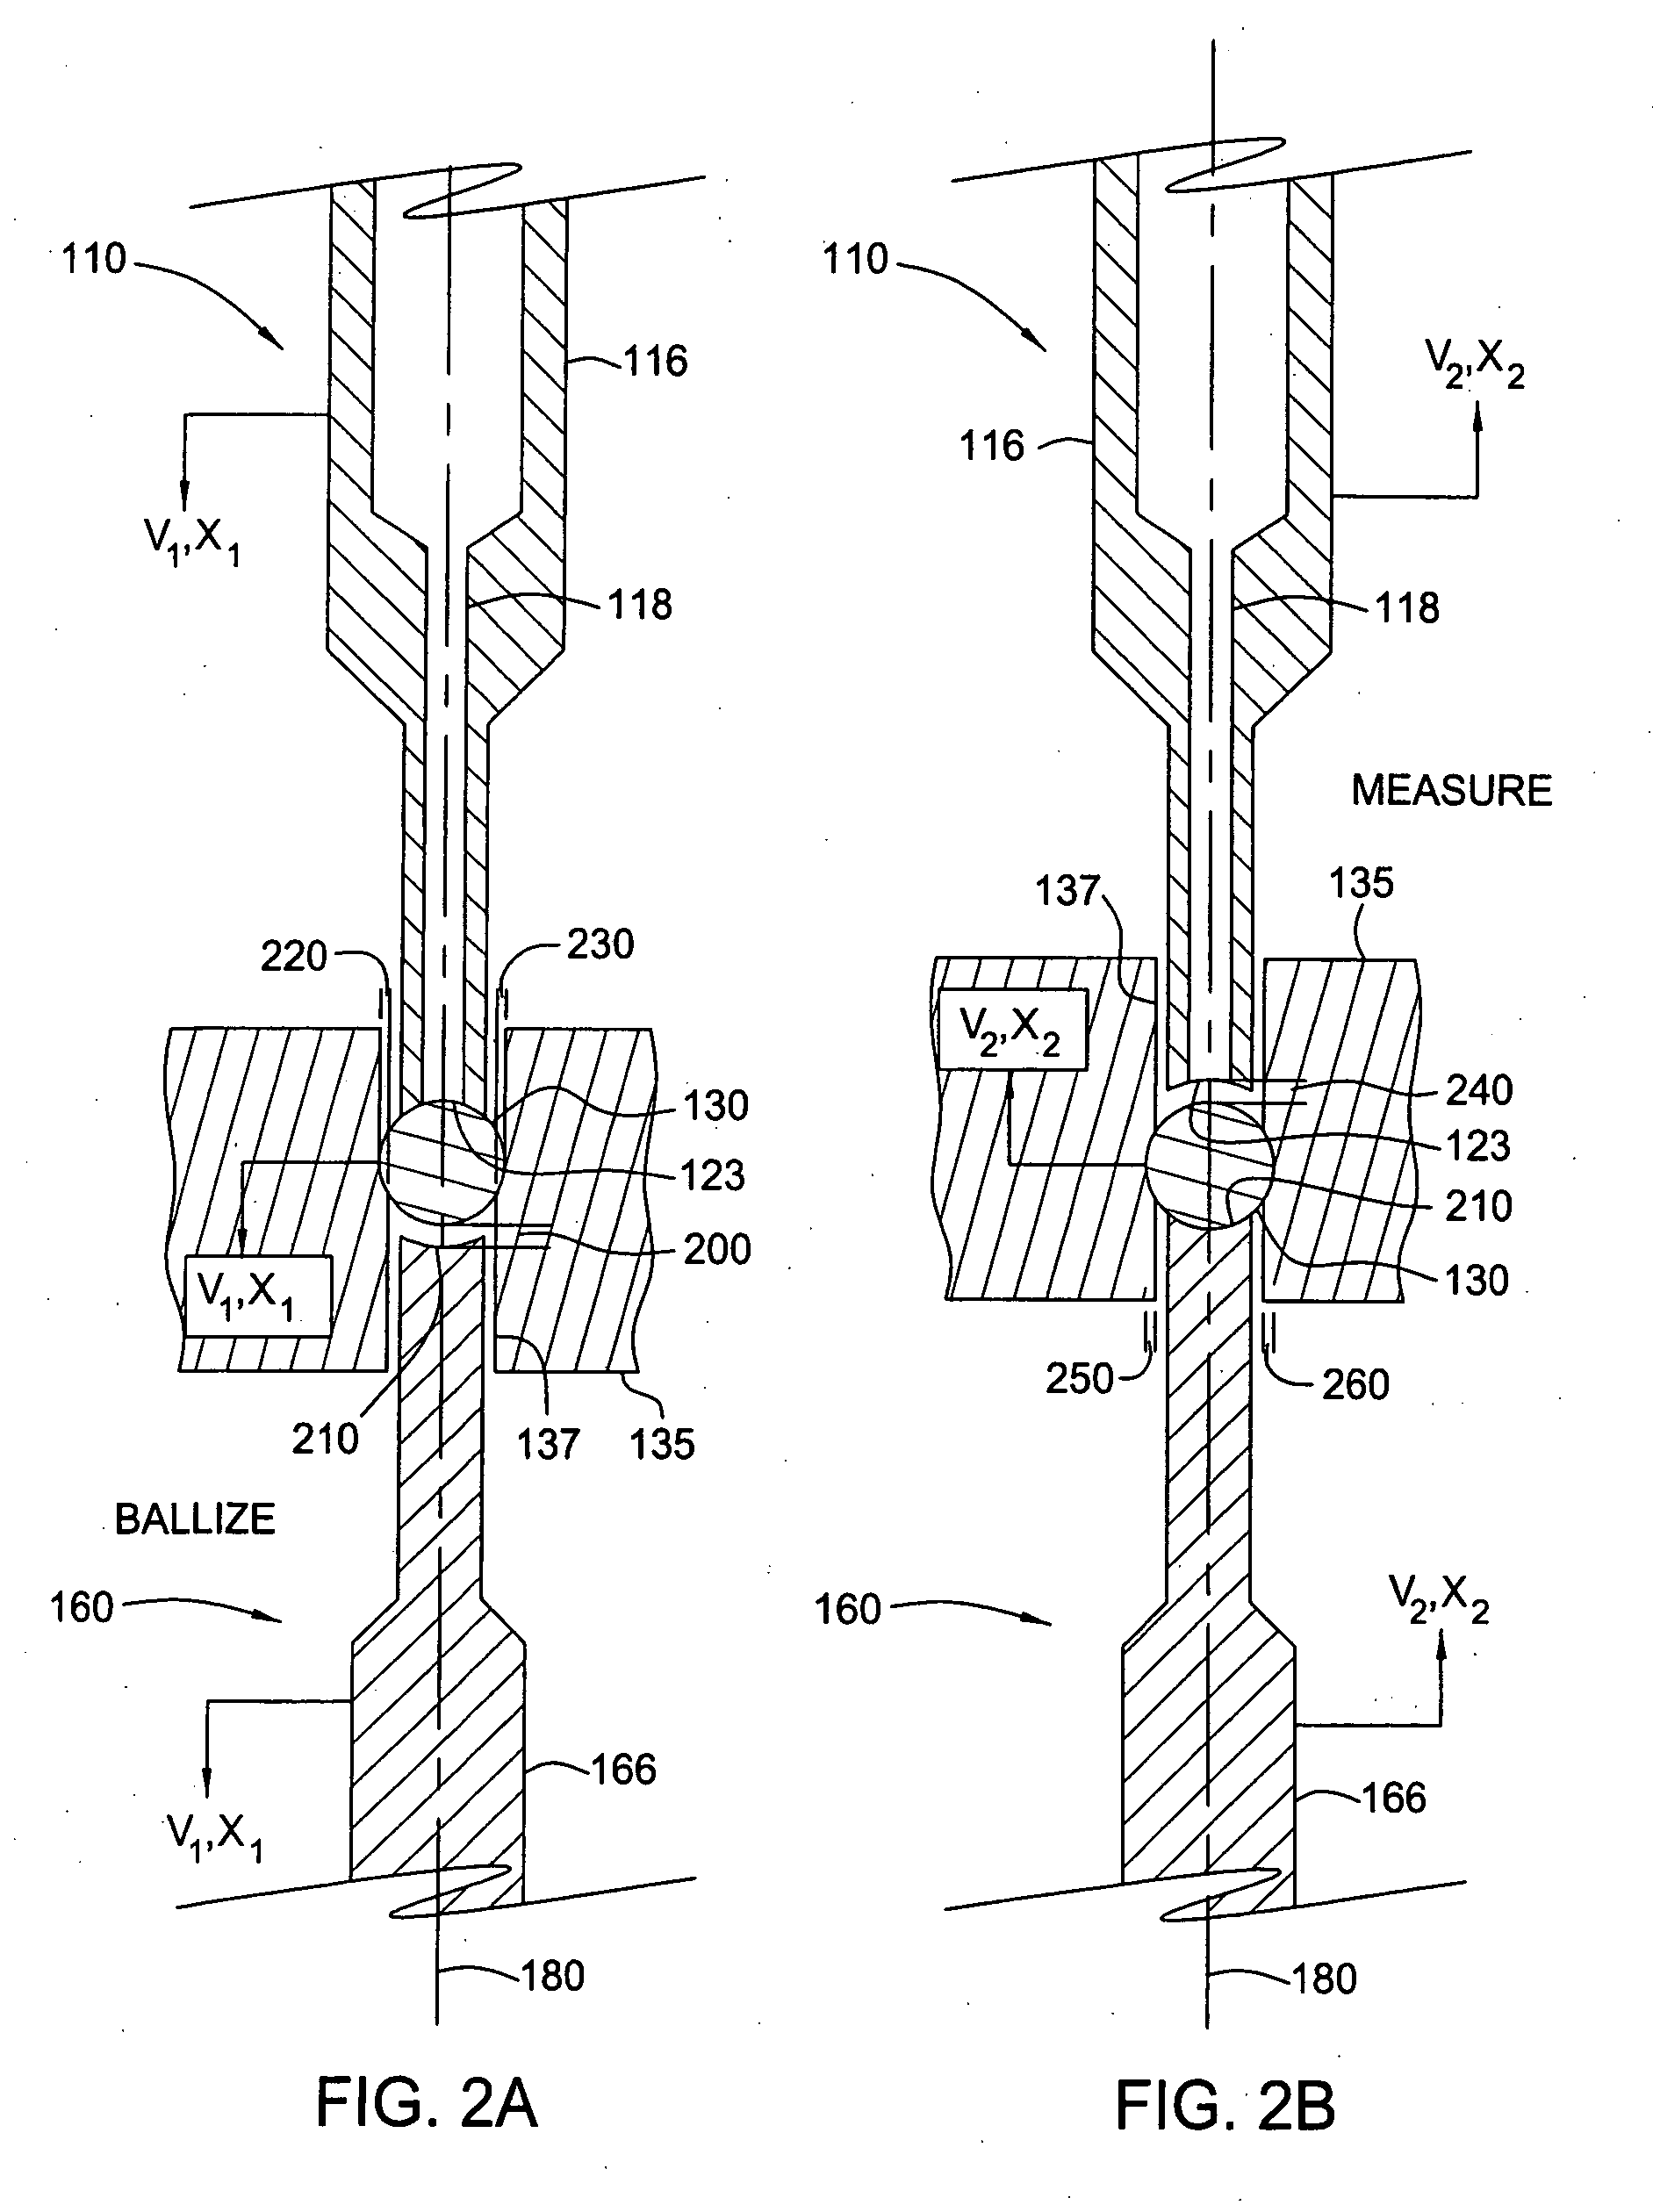 System and method for ballizing and measuring a workpiece bore hole